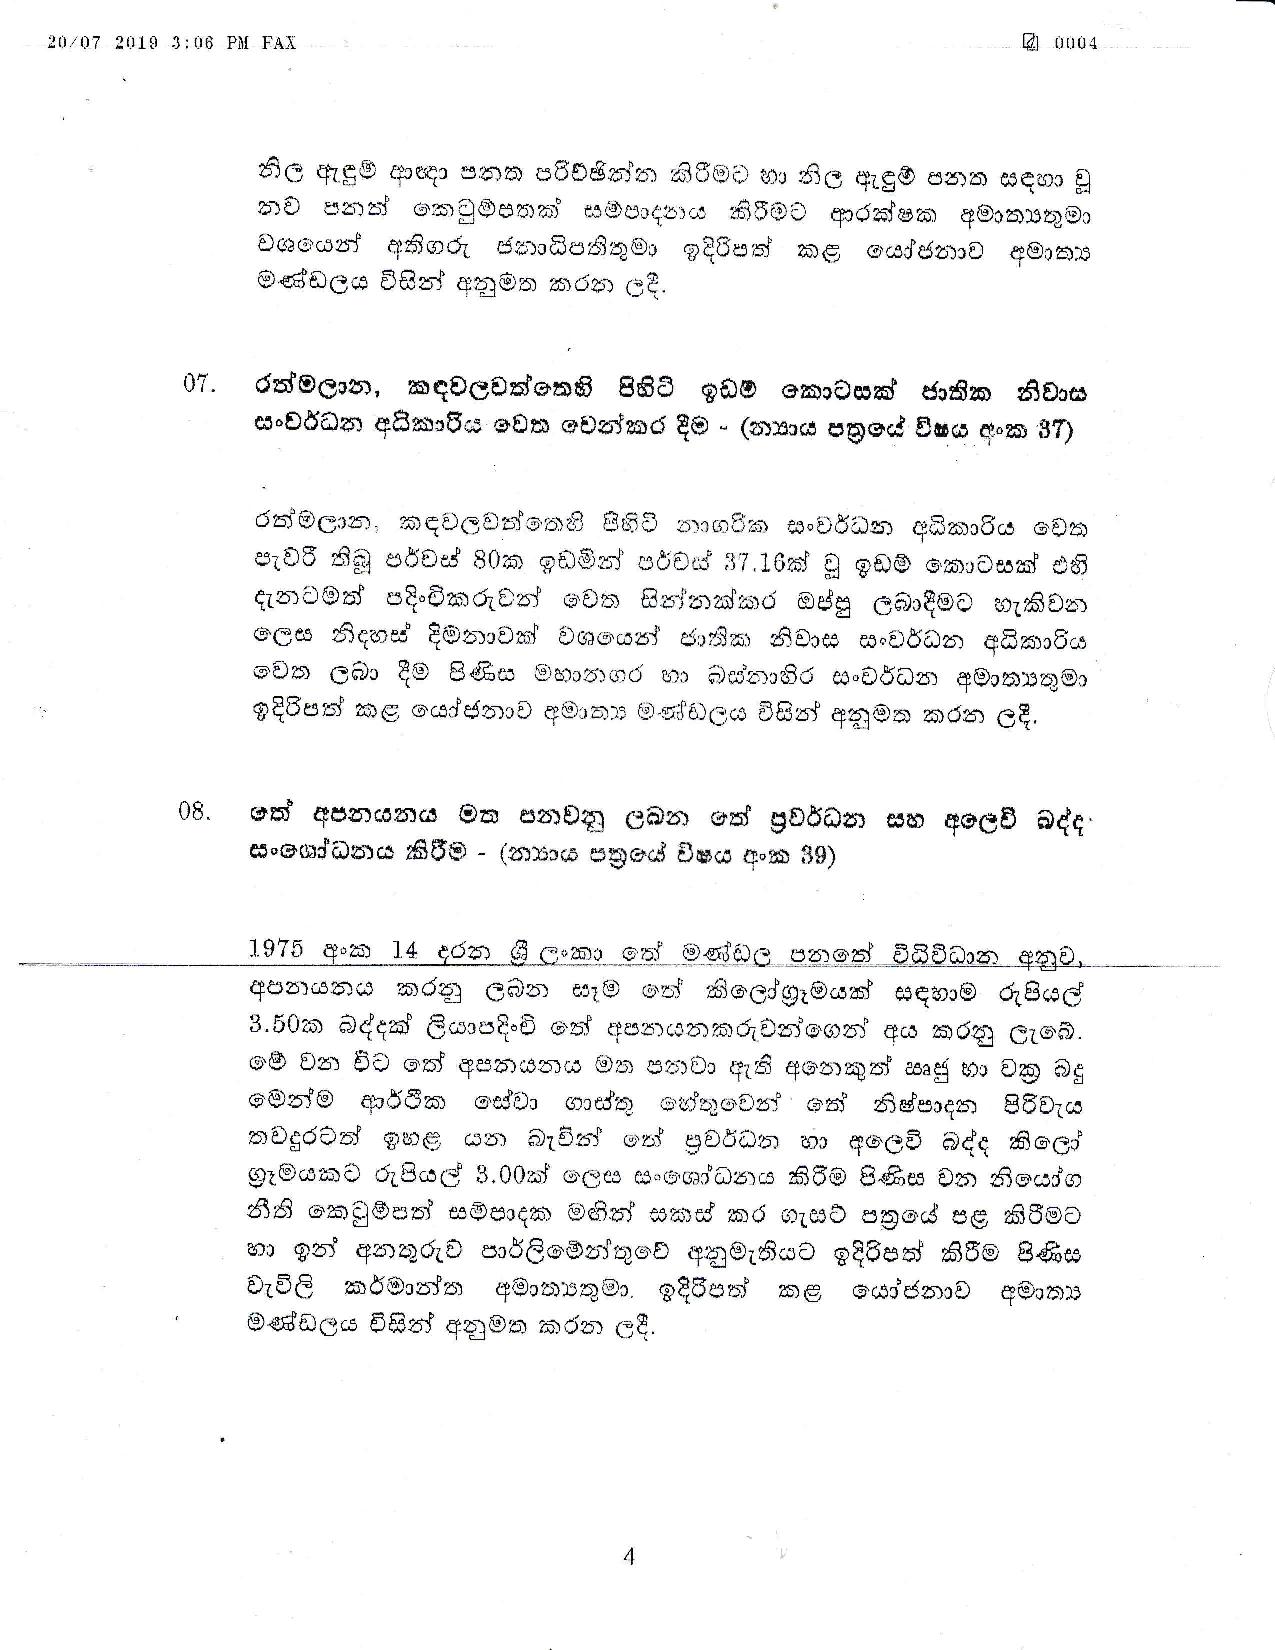 Cabinet Decision 19.07.2019 page 004